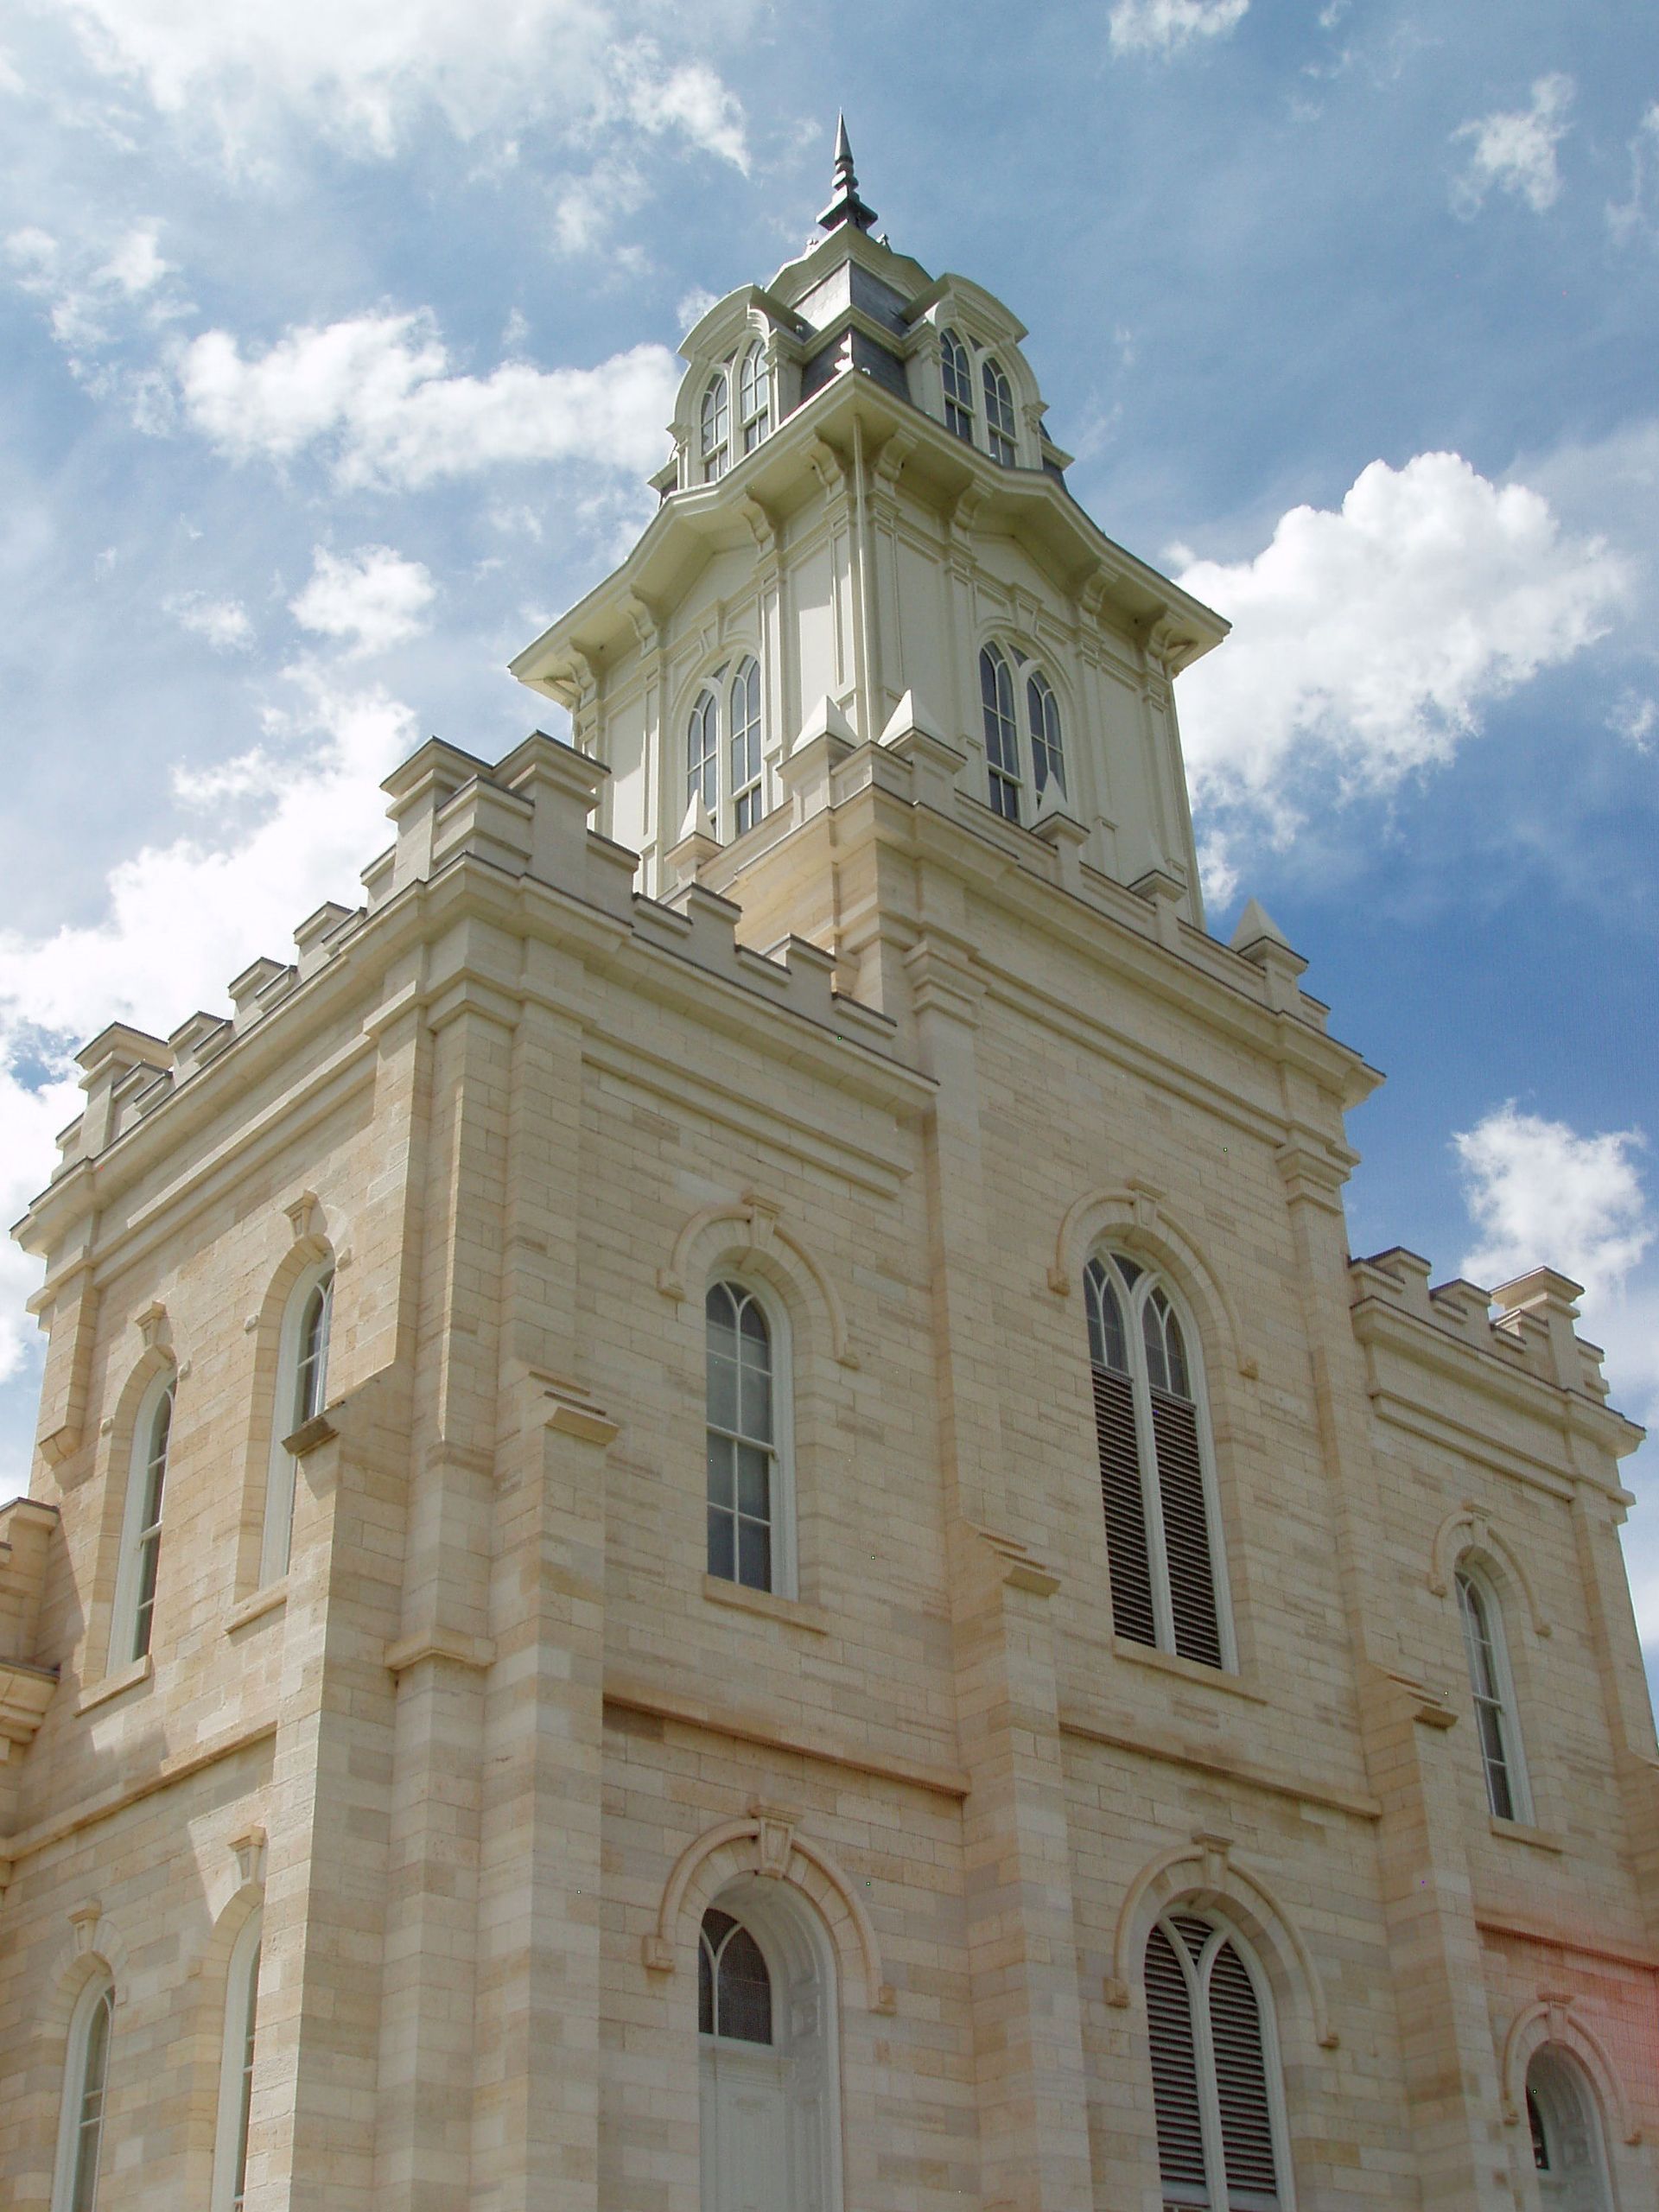 The Manti Utah Temple spire, including windows and the exterior of the temple.